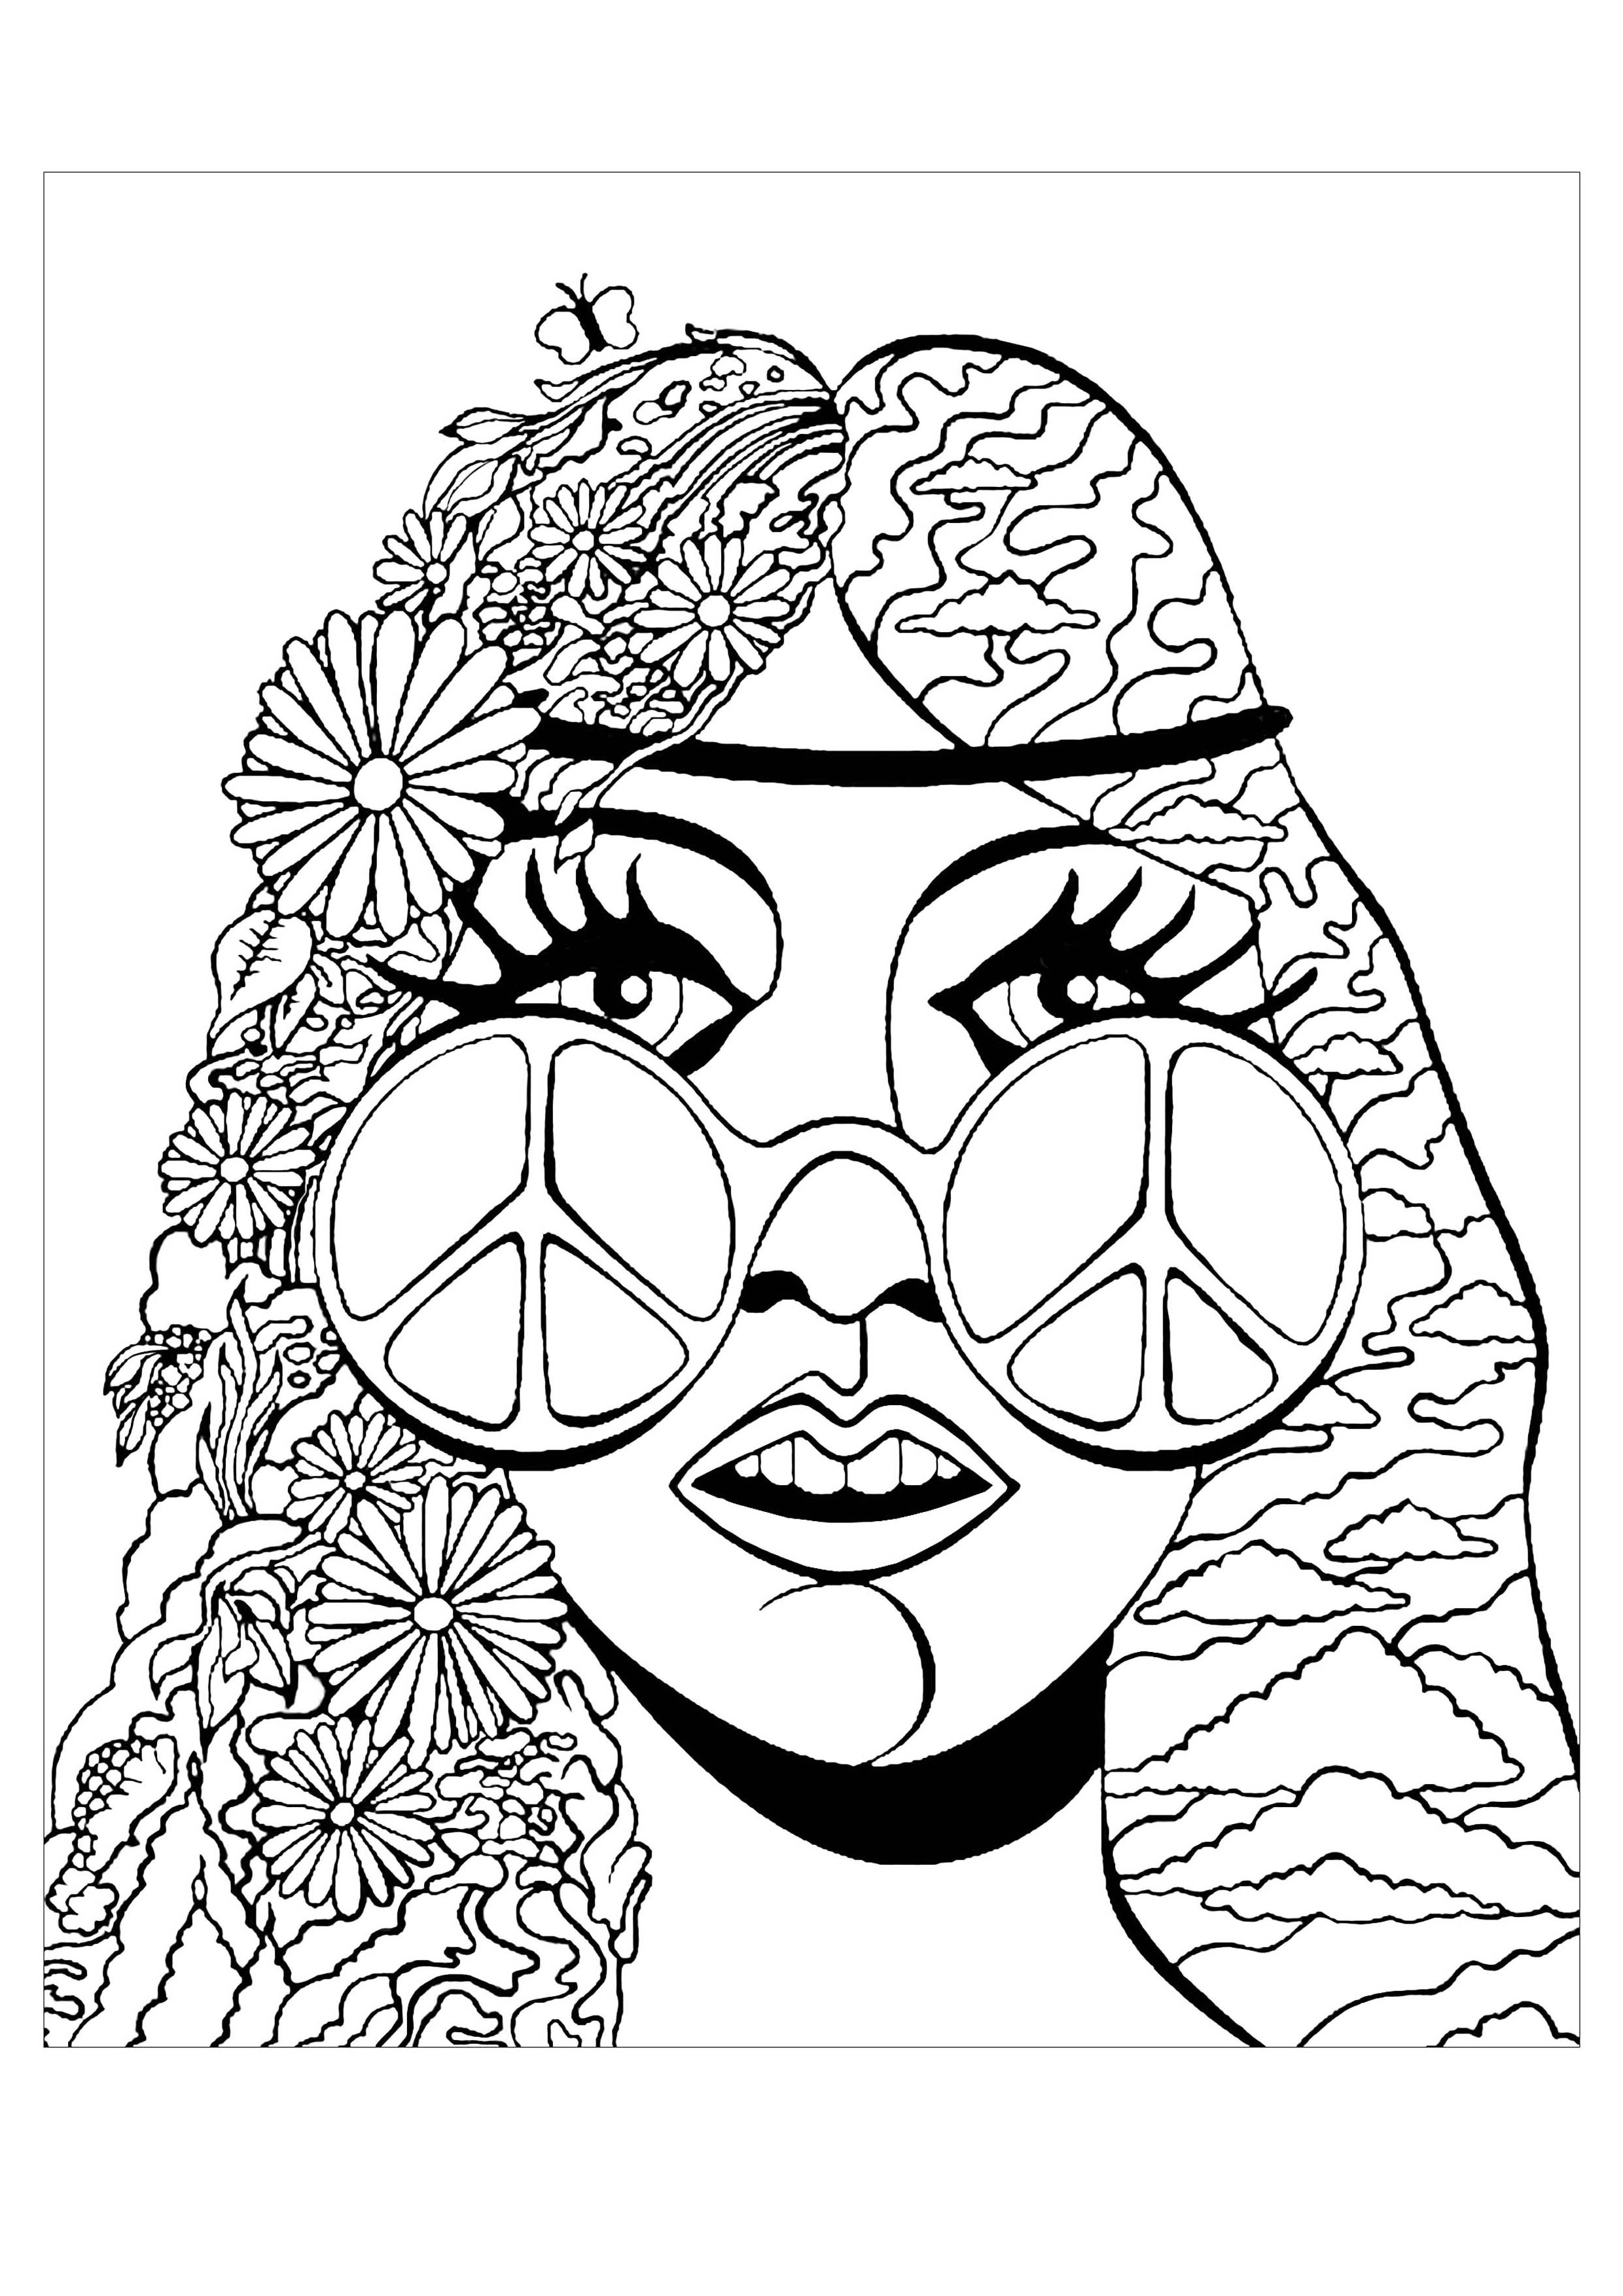 Psychedelic girl butterfly - Psychedelic Adult Coloring Pages